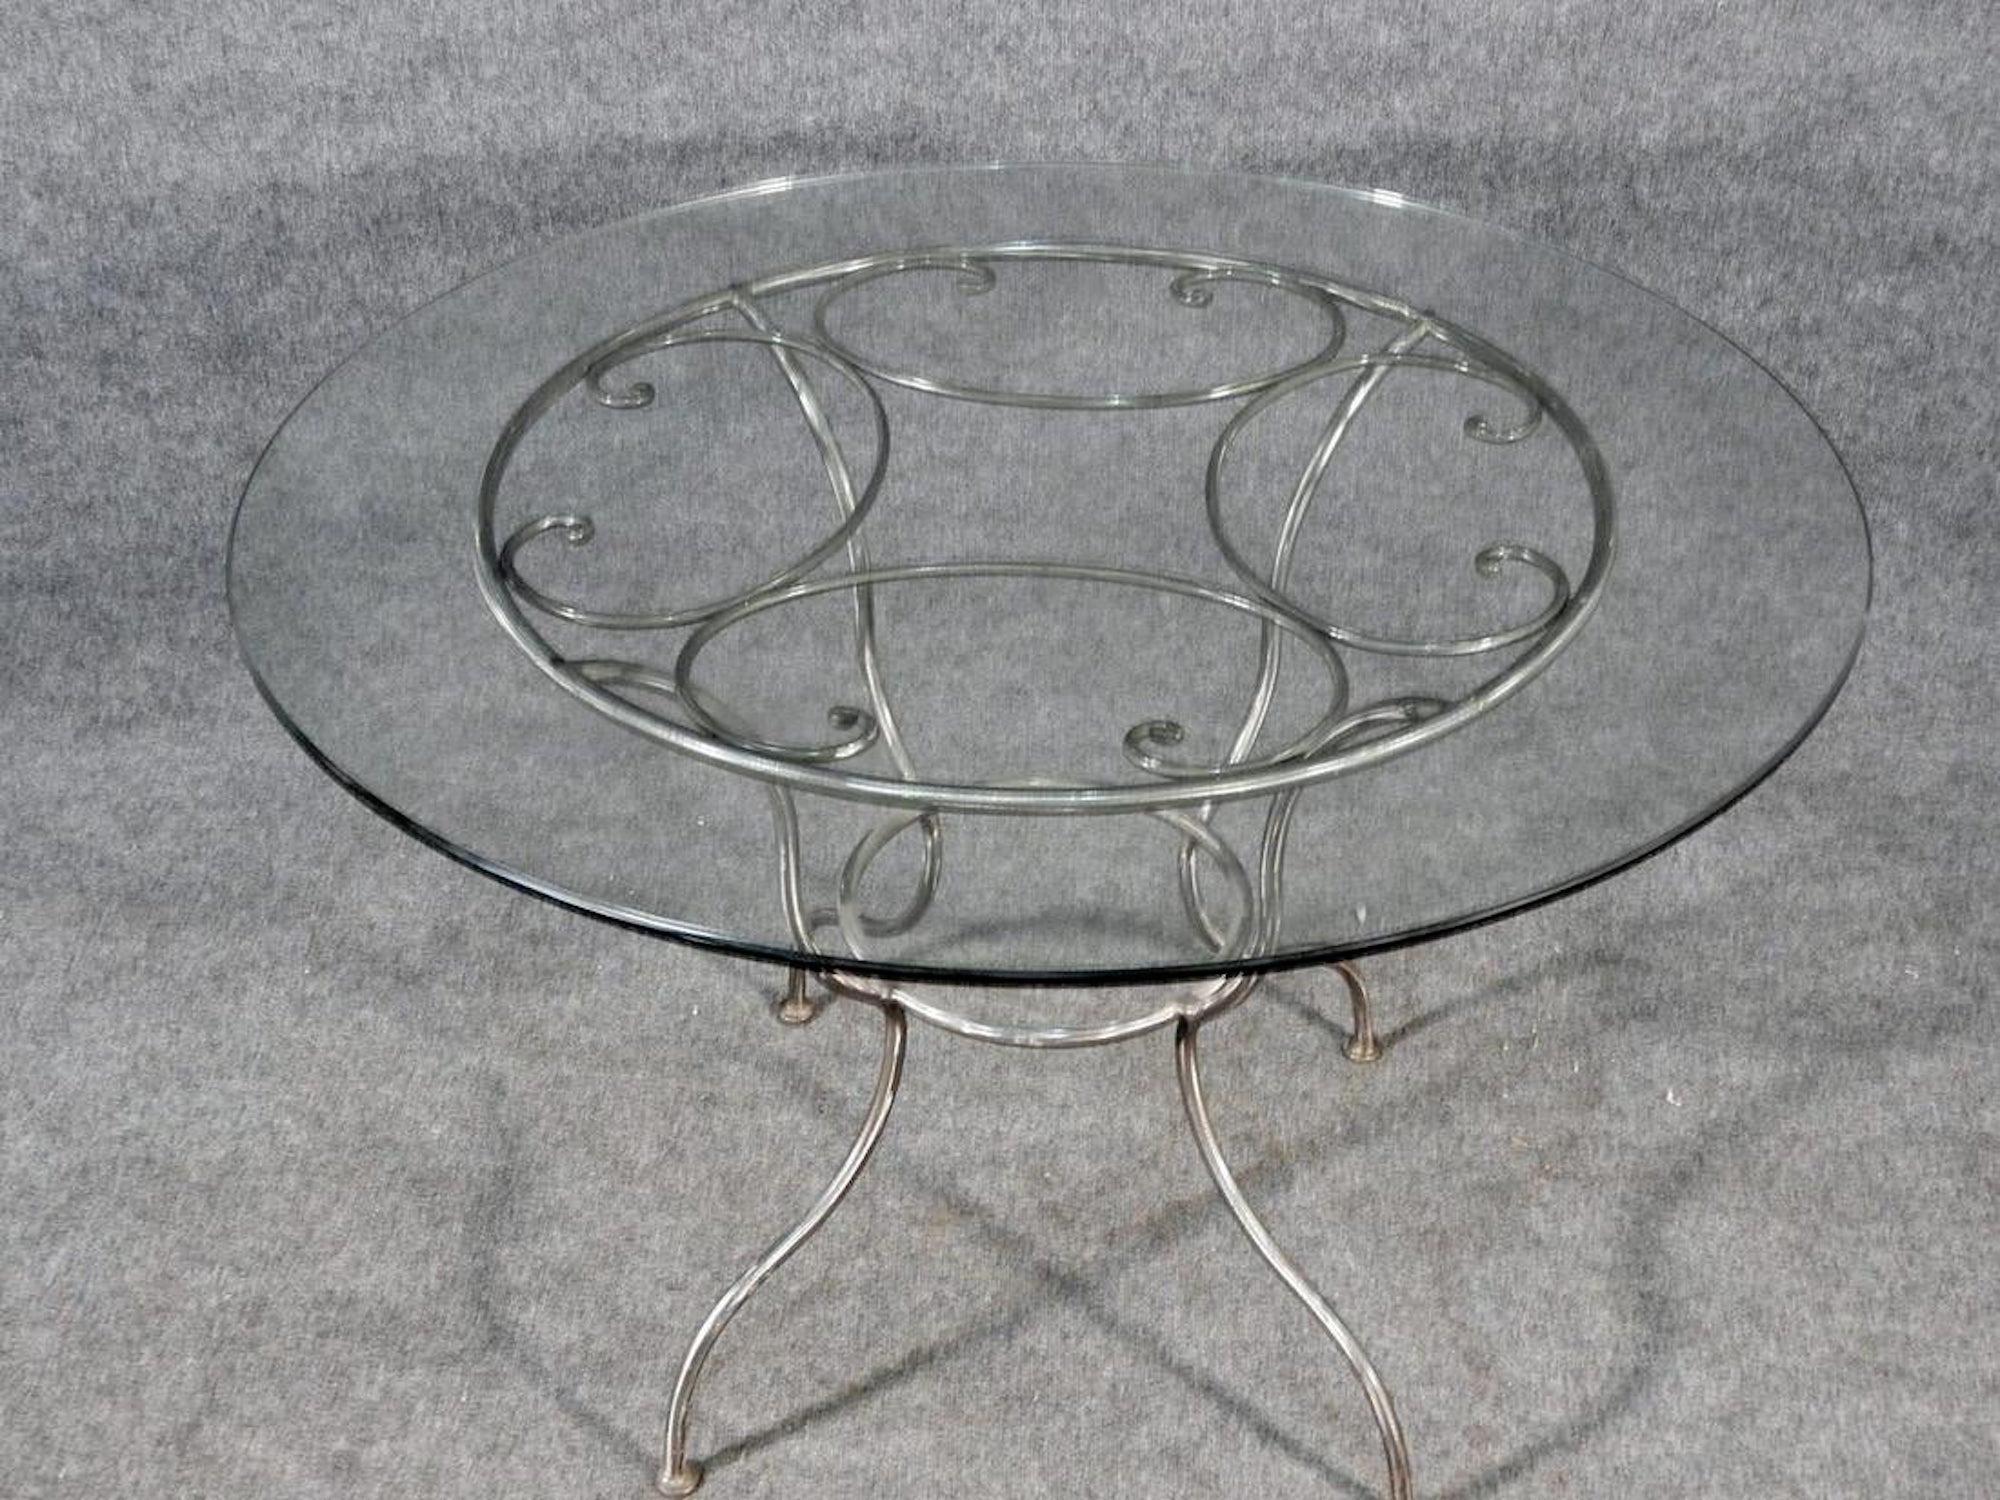 Metal base with brush metal finish and round glass top.
(Please confirm item location - NY or NJ - with dealer).
   